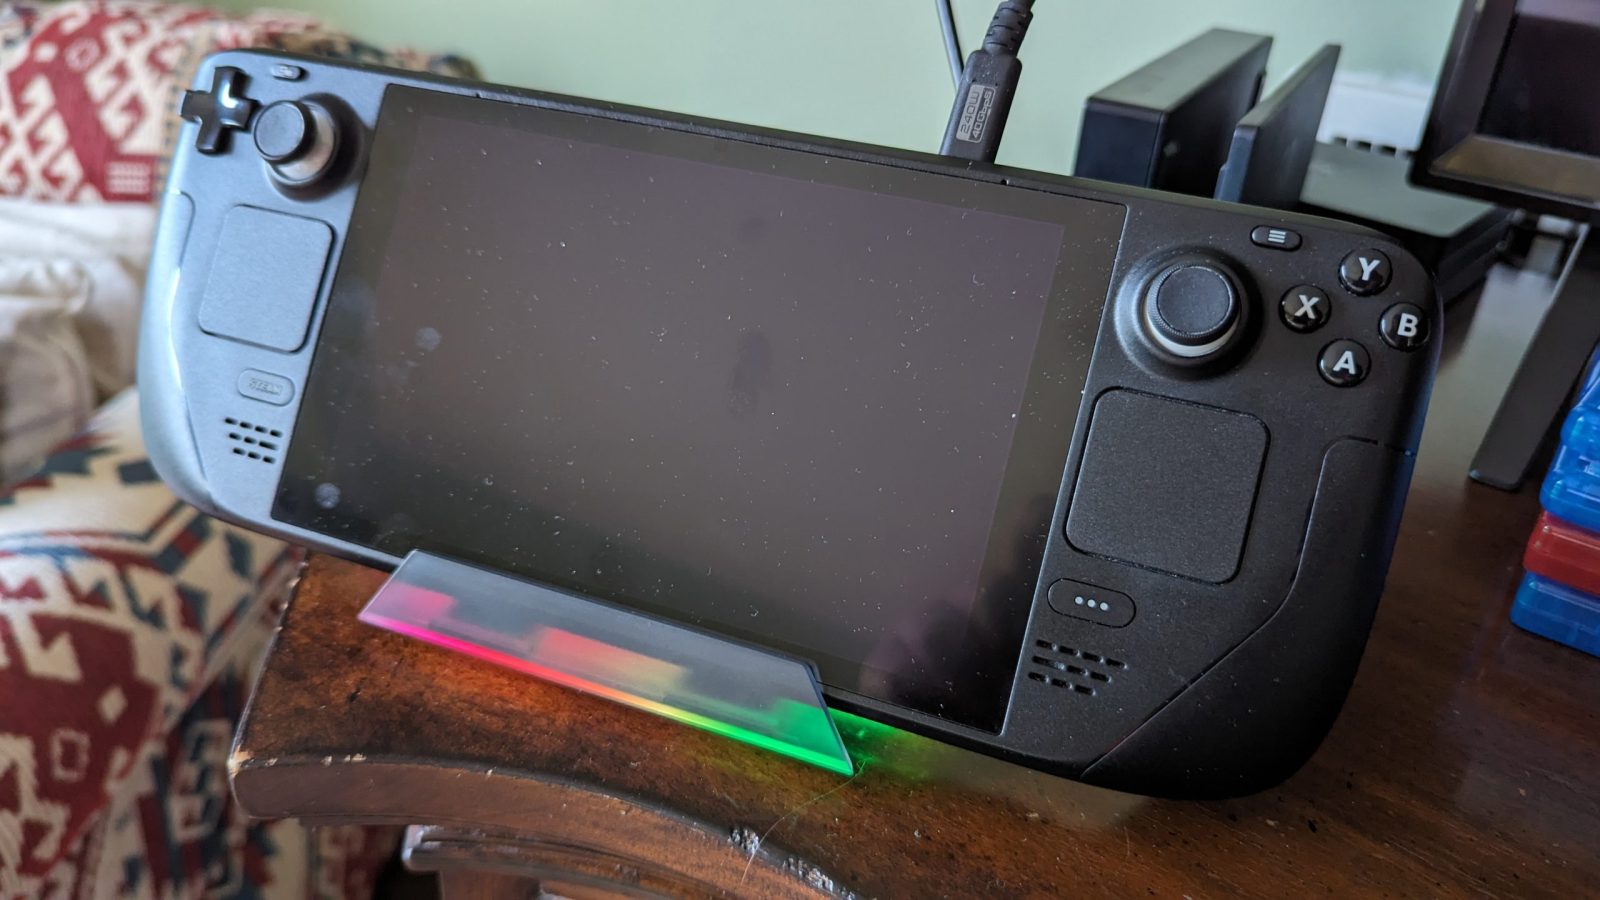 At last, now even your Steam Deck can have RGB